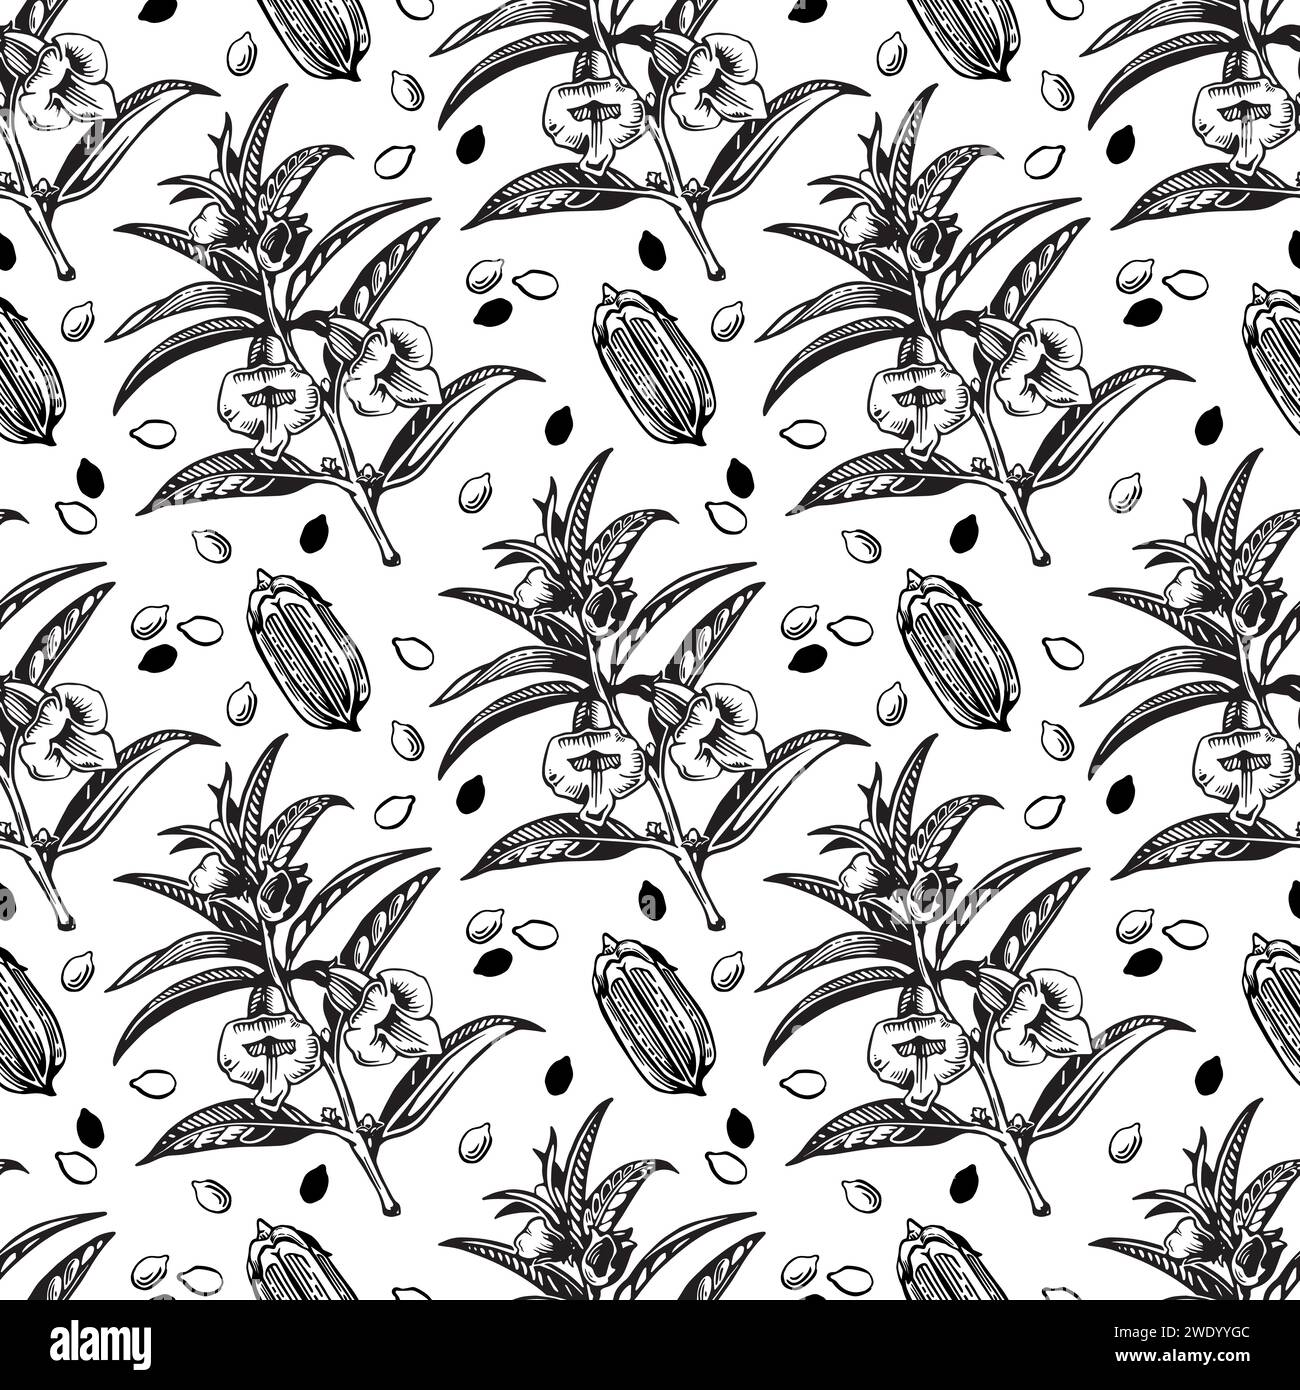 Floral seamless pattern. Black and white vector illustration with leaves and flowers. Stock Vector